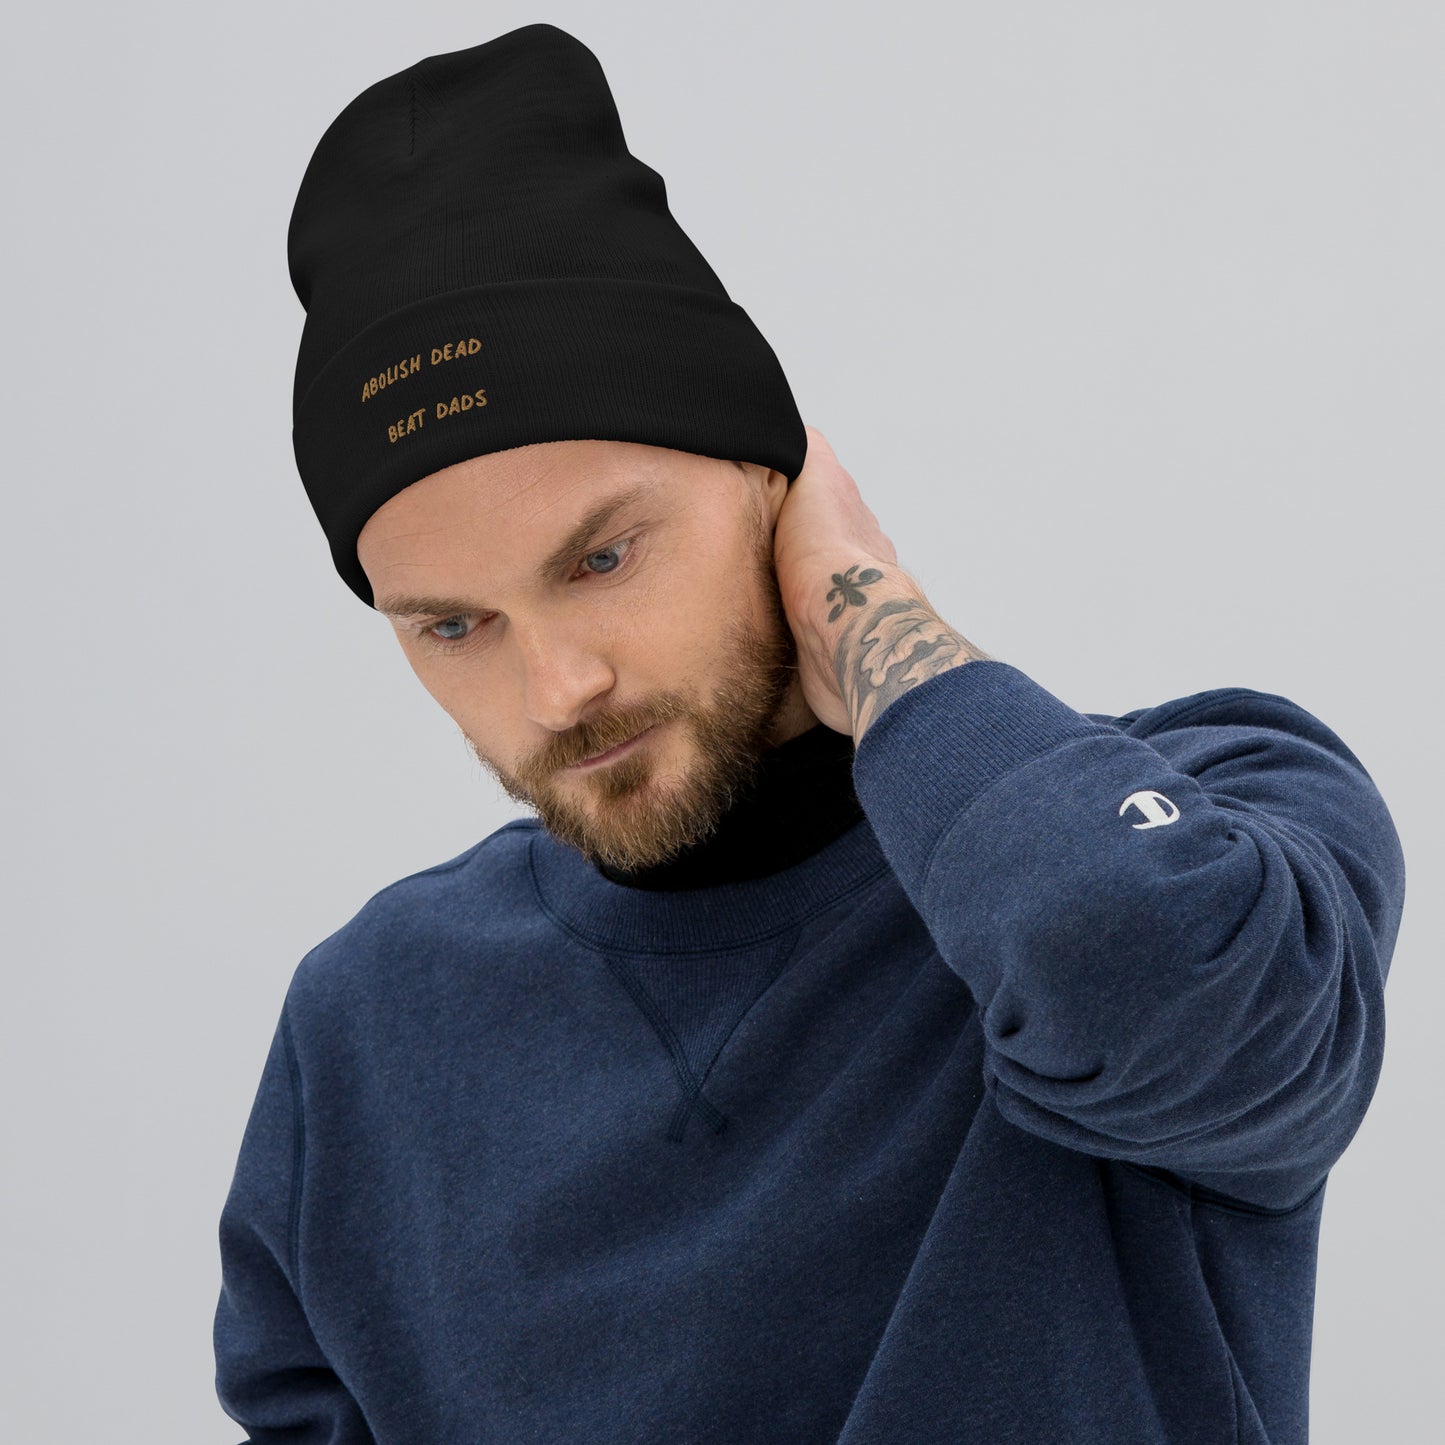 Abolish Dead Beat Dad's Embroidered Beanie